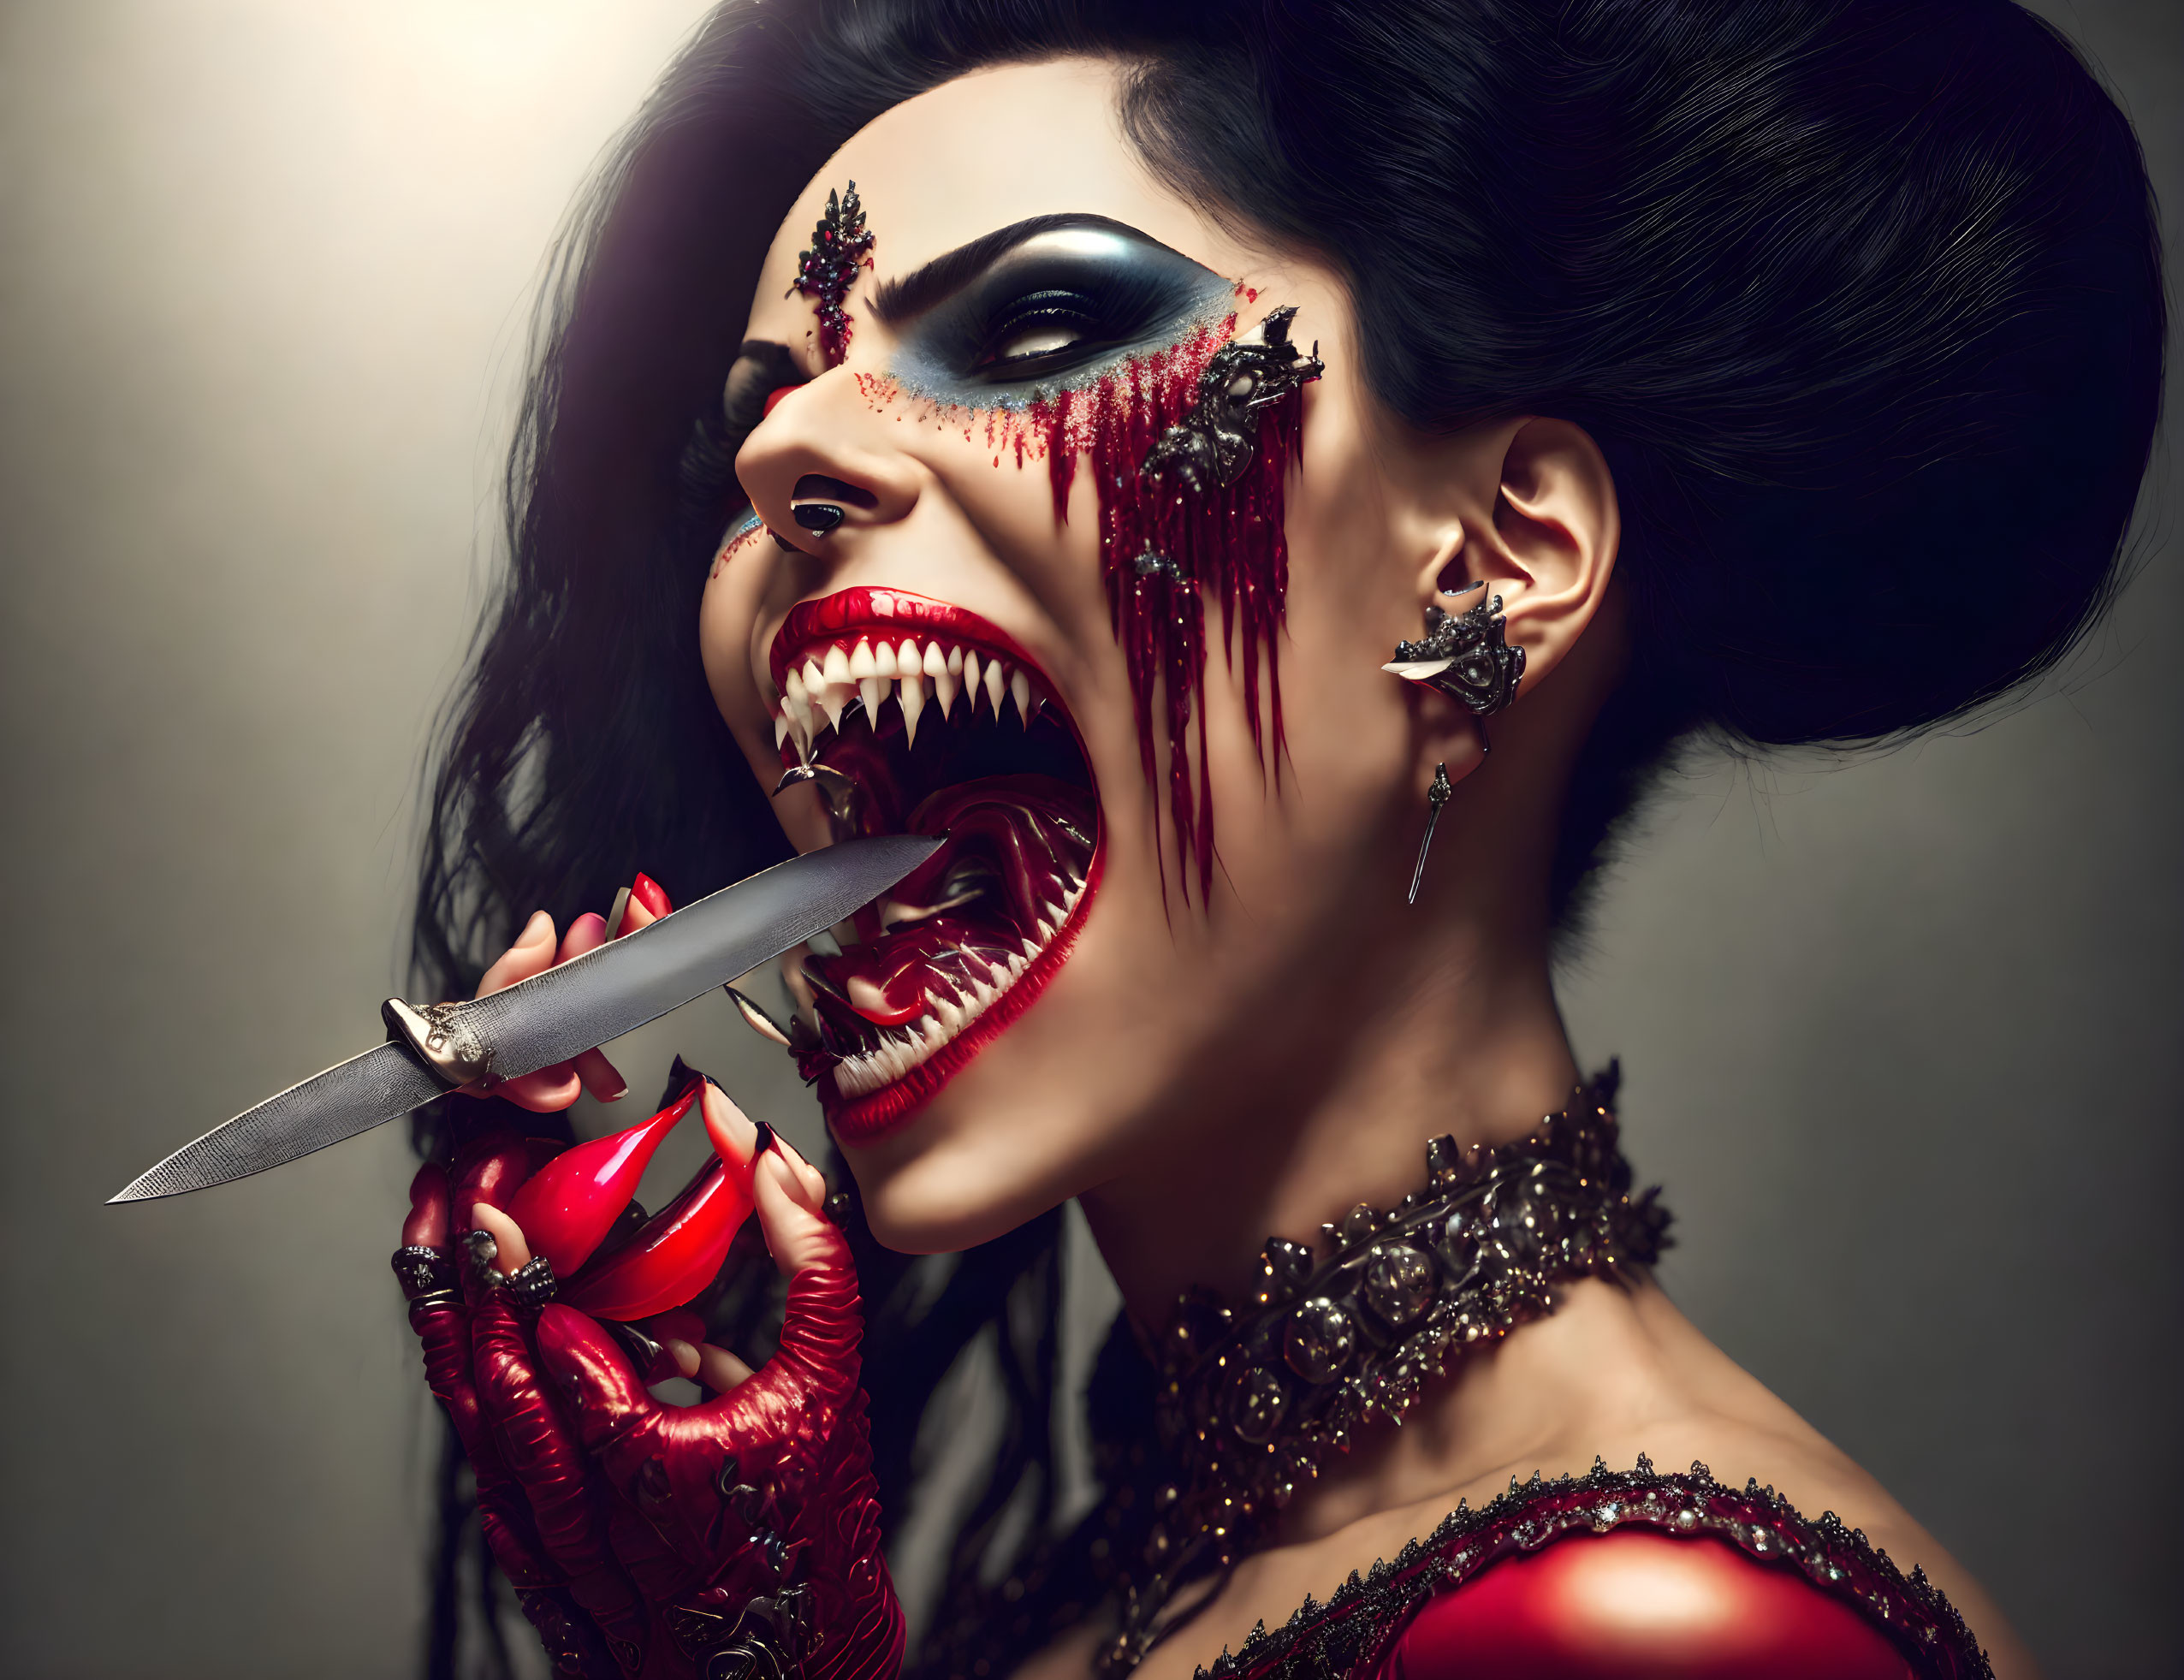 Woman with vampire makeup and fangs holding knife, dripping blood, in red gloves and ornate jewelry